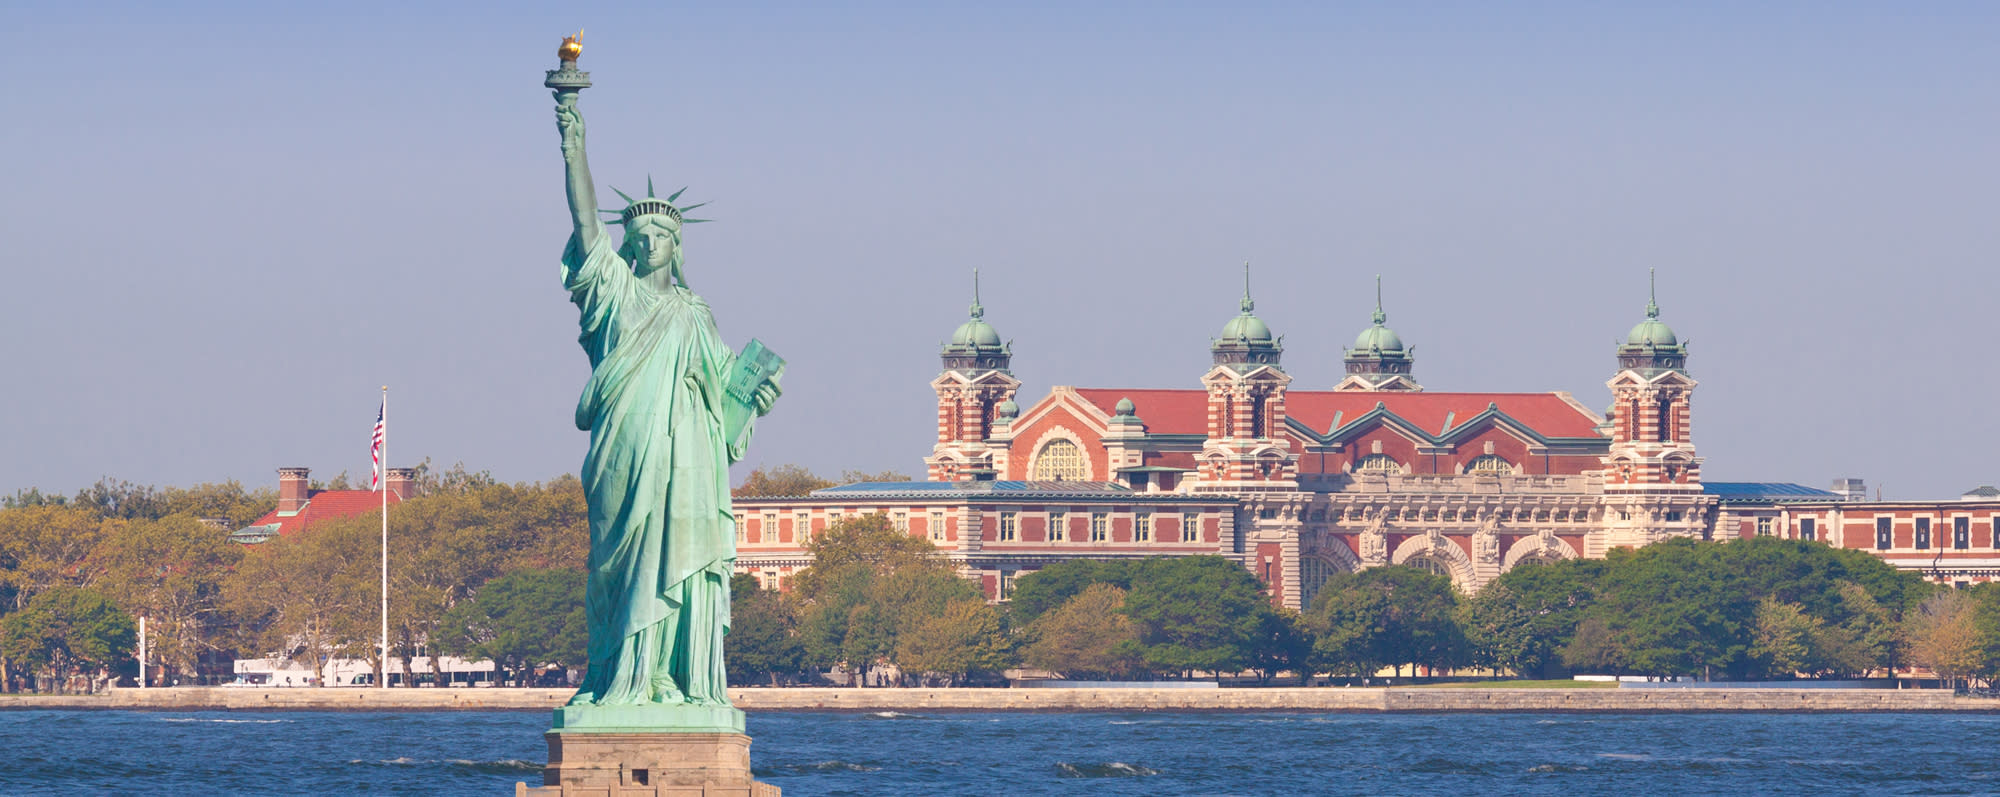 Ellis Island and the Statue of Liberty on a sunny day in New York City